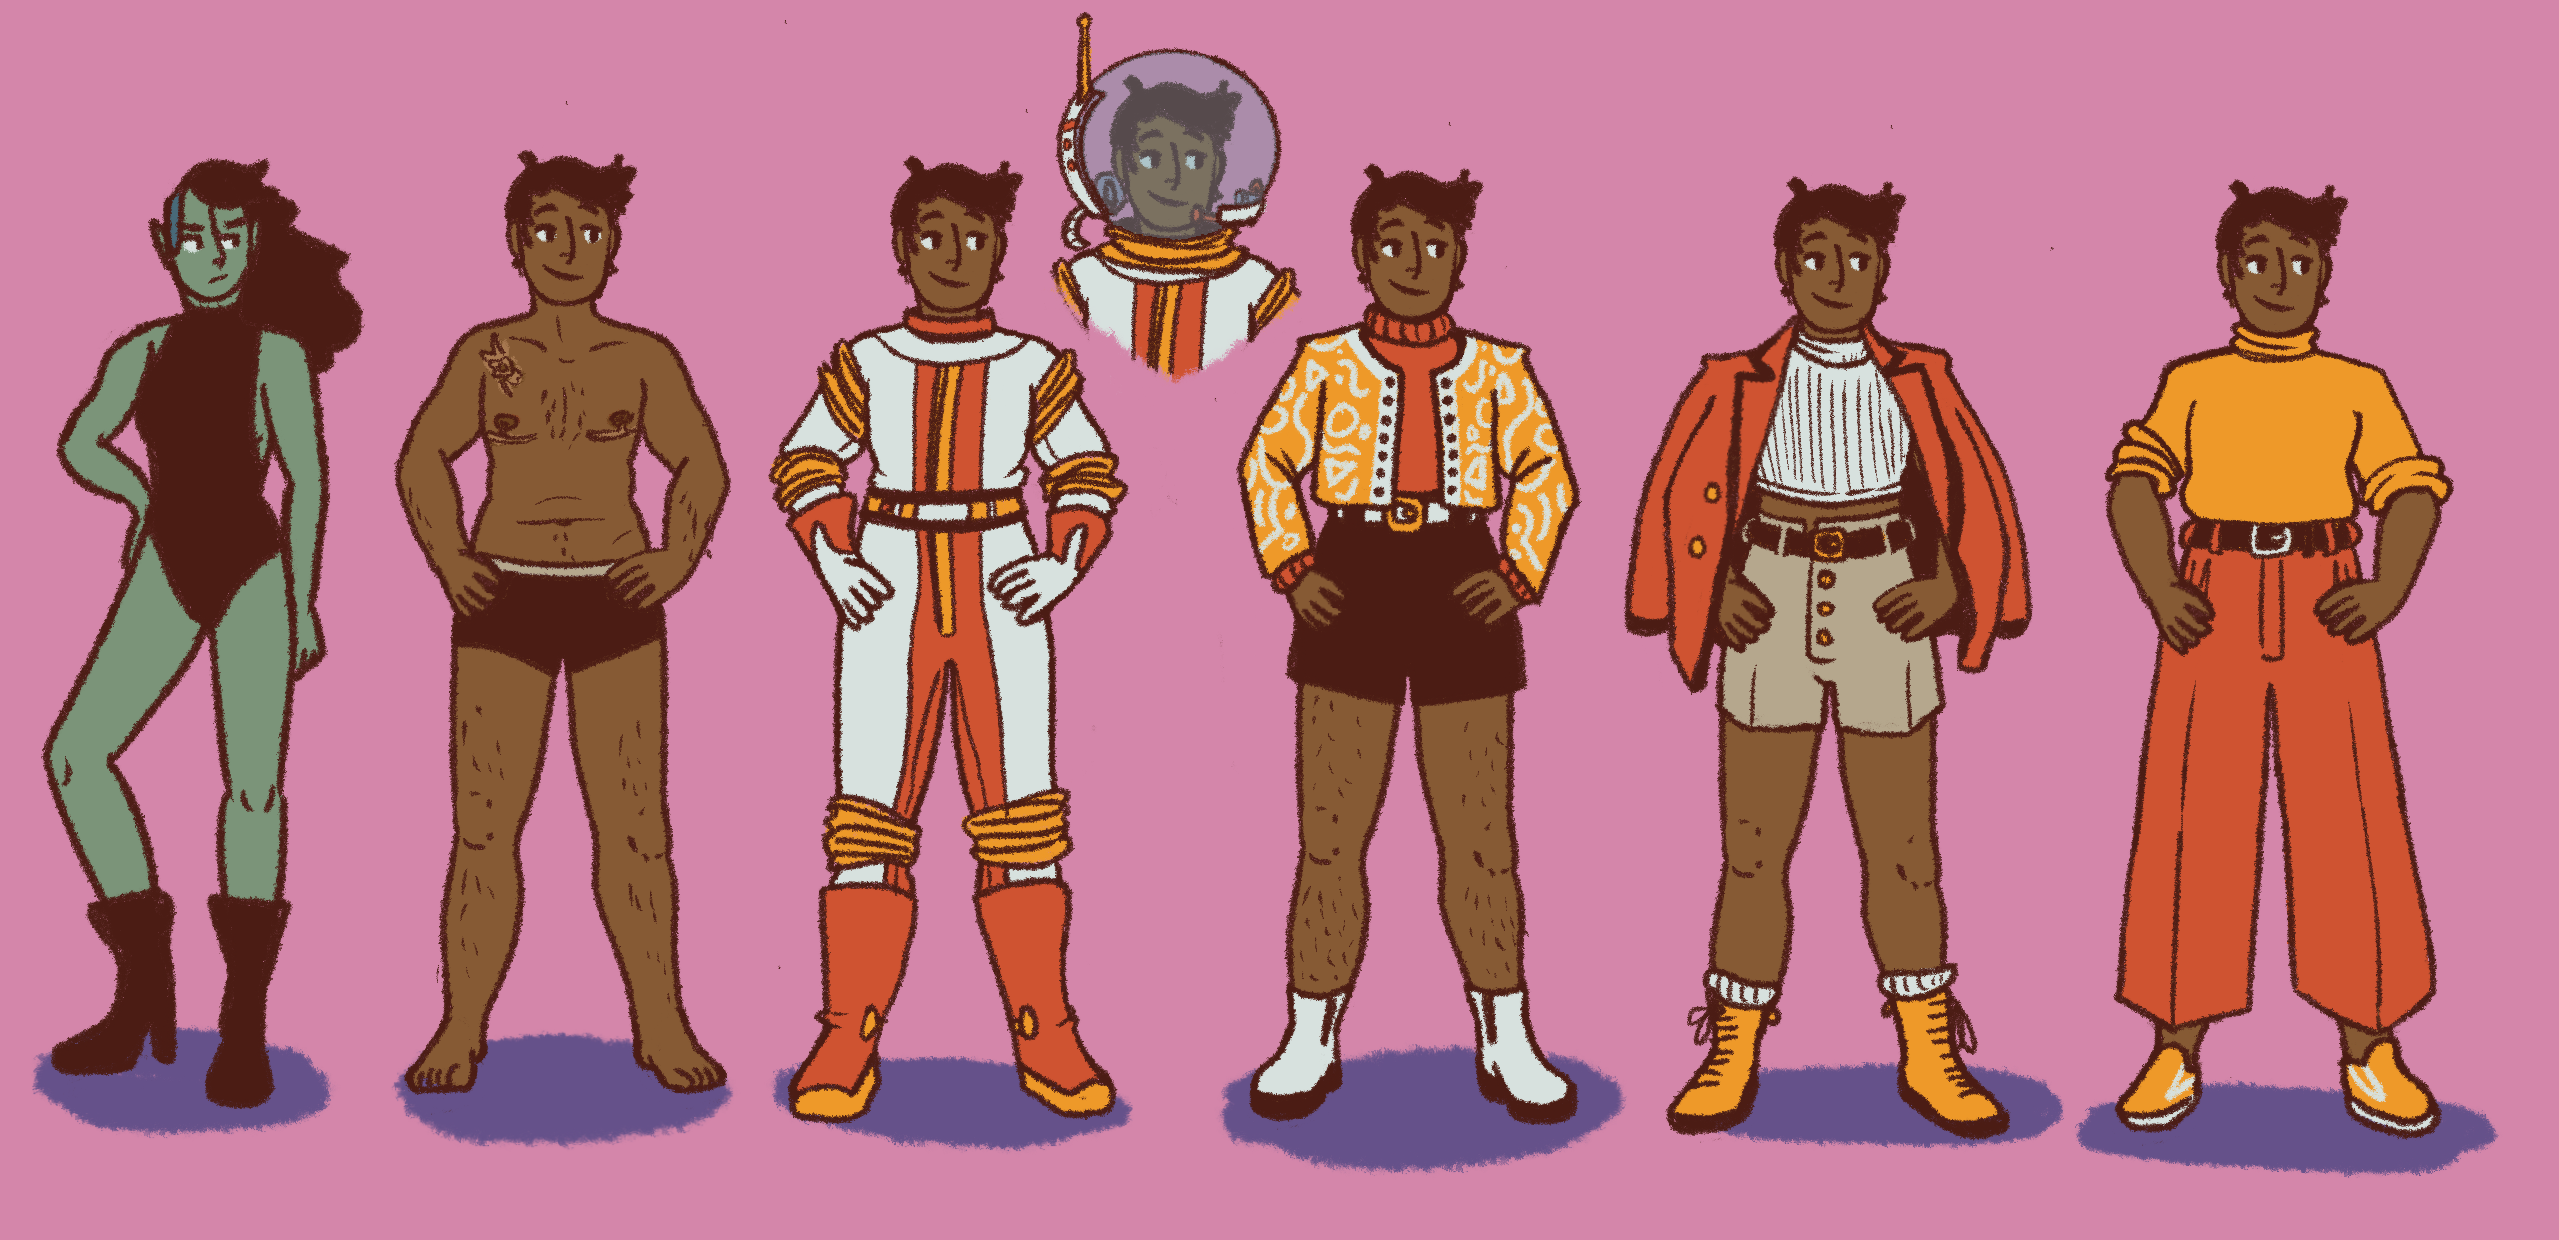 fashion illustrations of a nonbinary person in a variety of bright 60's inspired space fashions